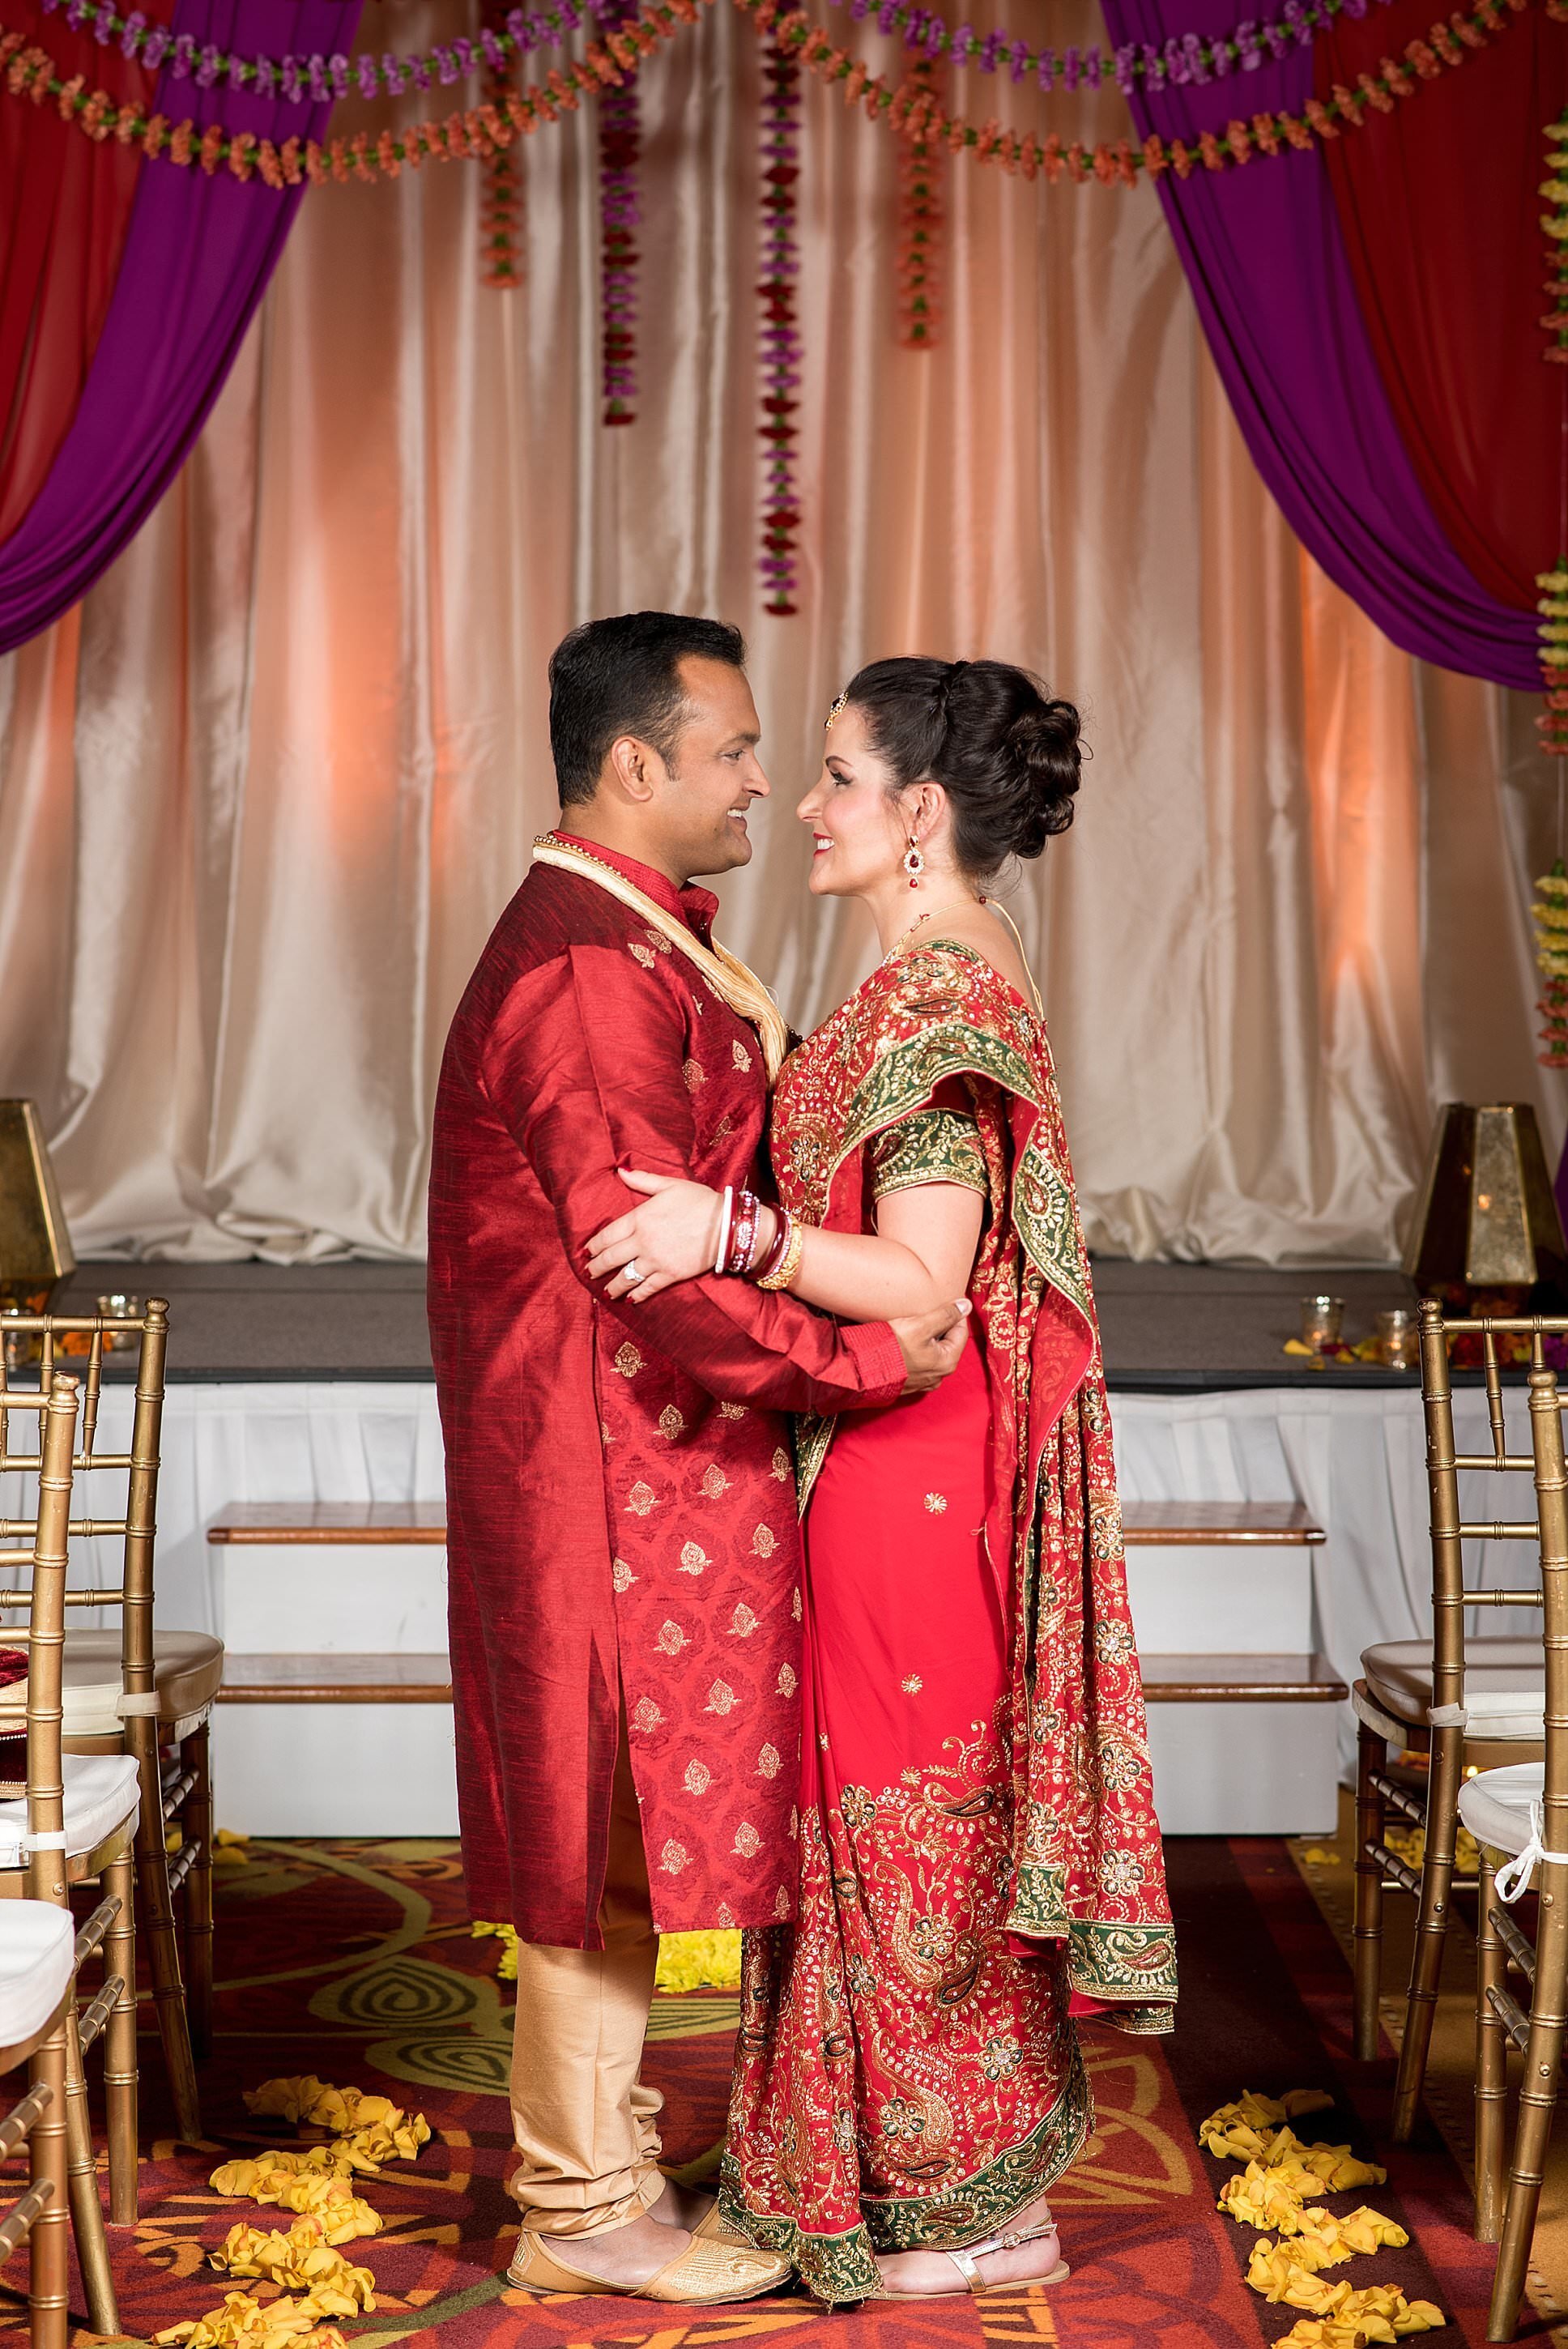 Couple facing one another under fuchsia and red mandap wearing traditional Indian wedding attire